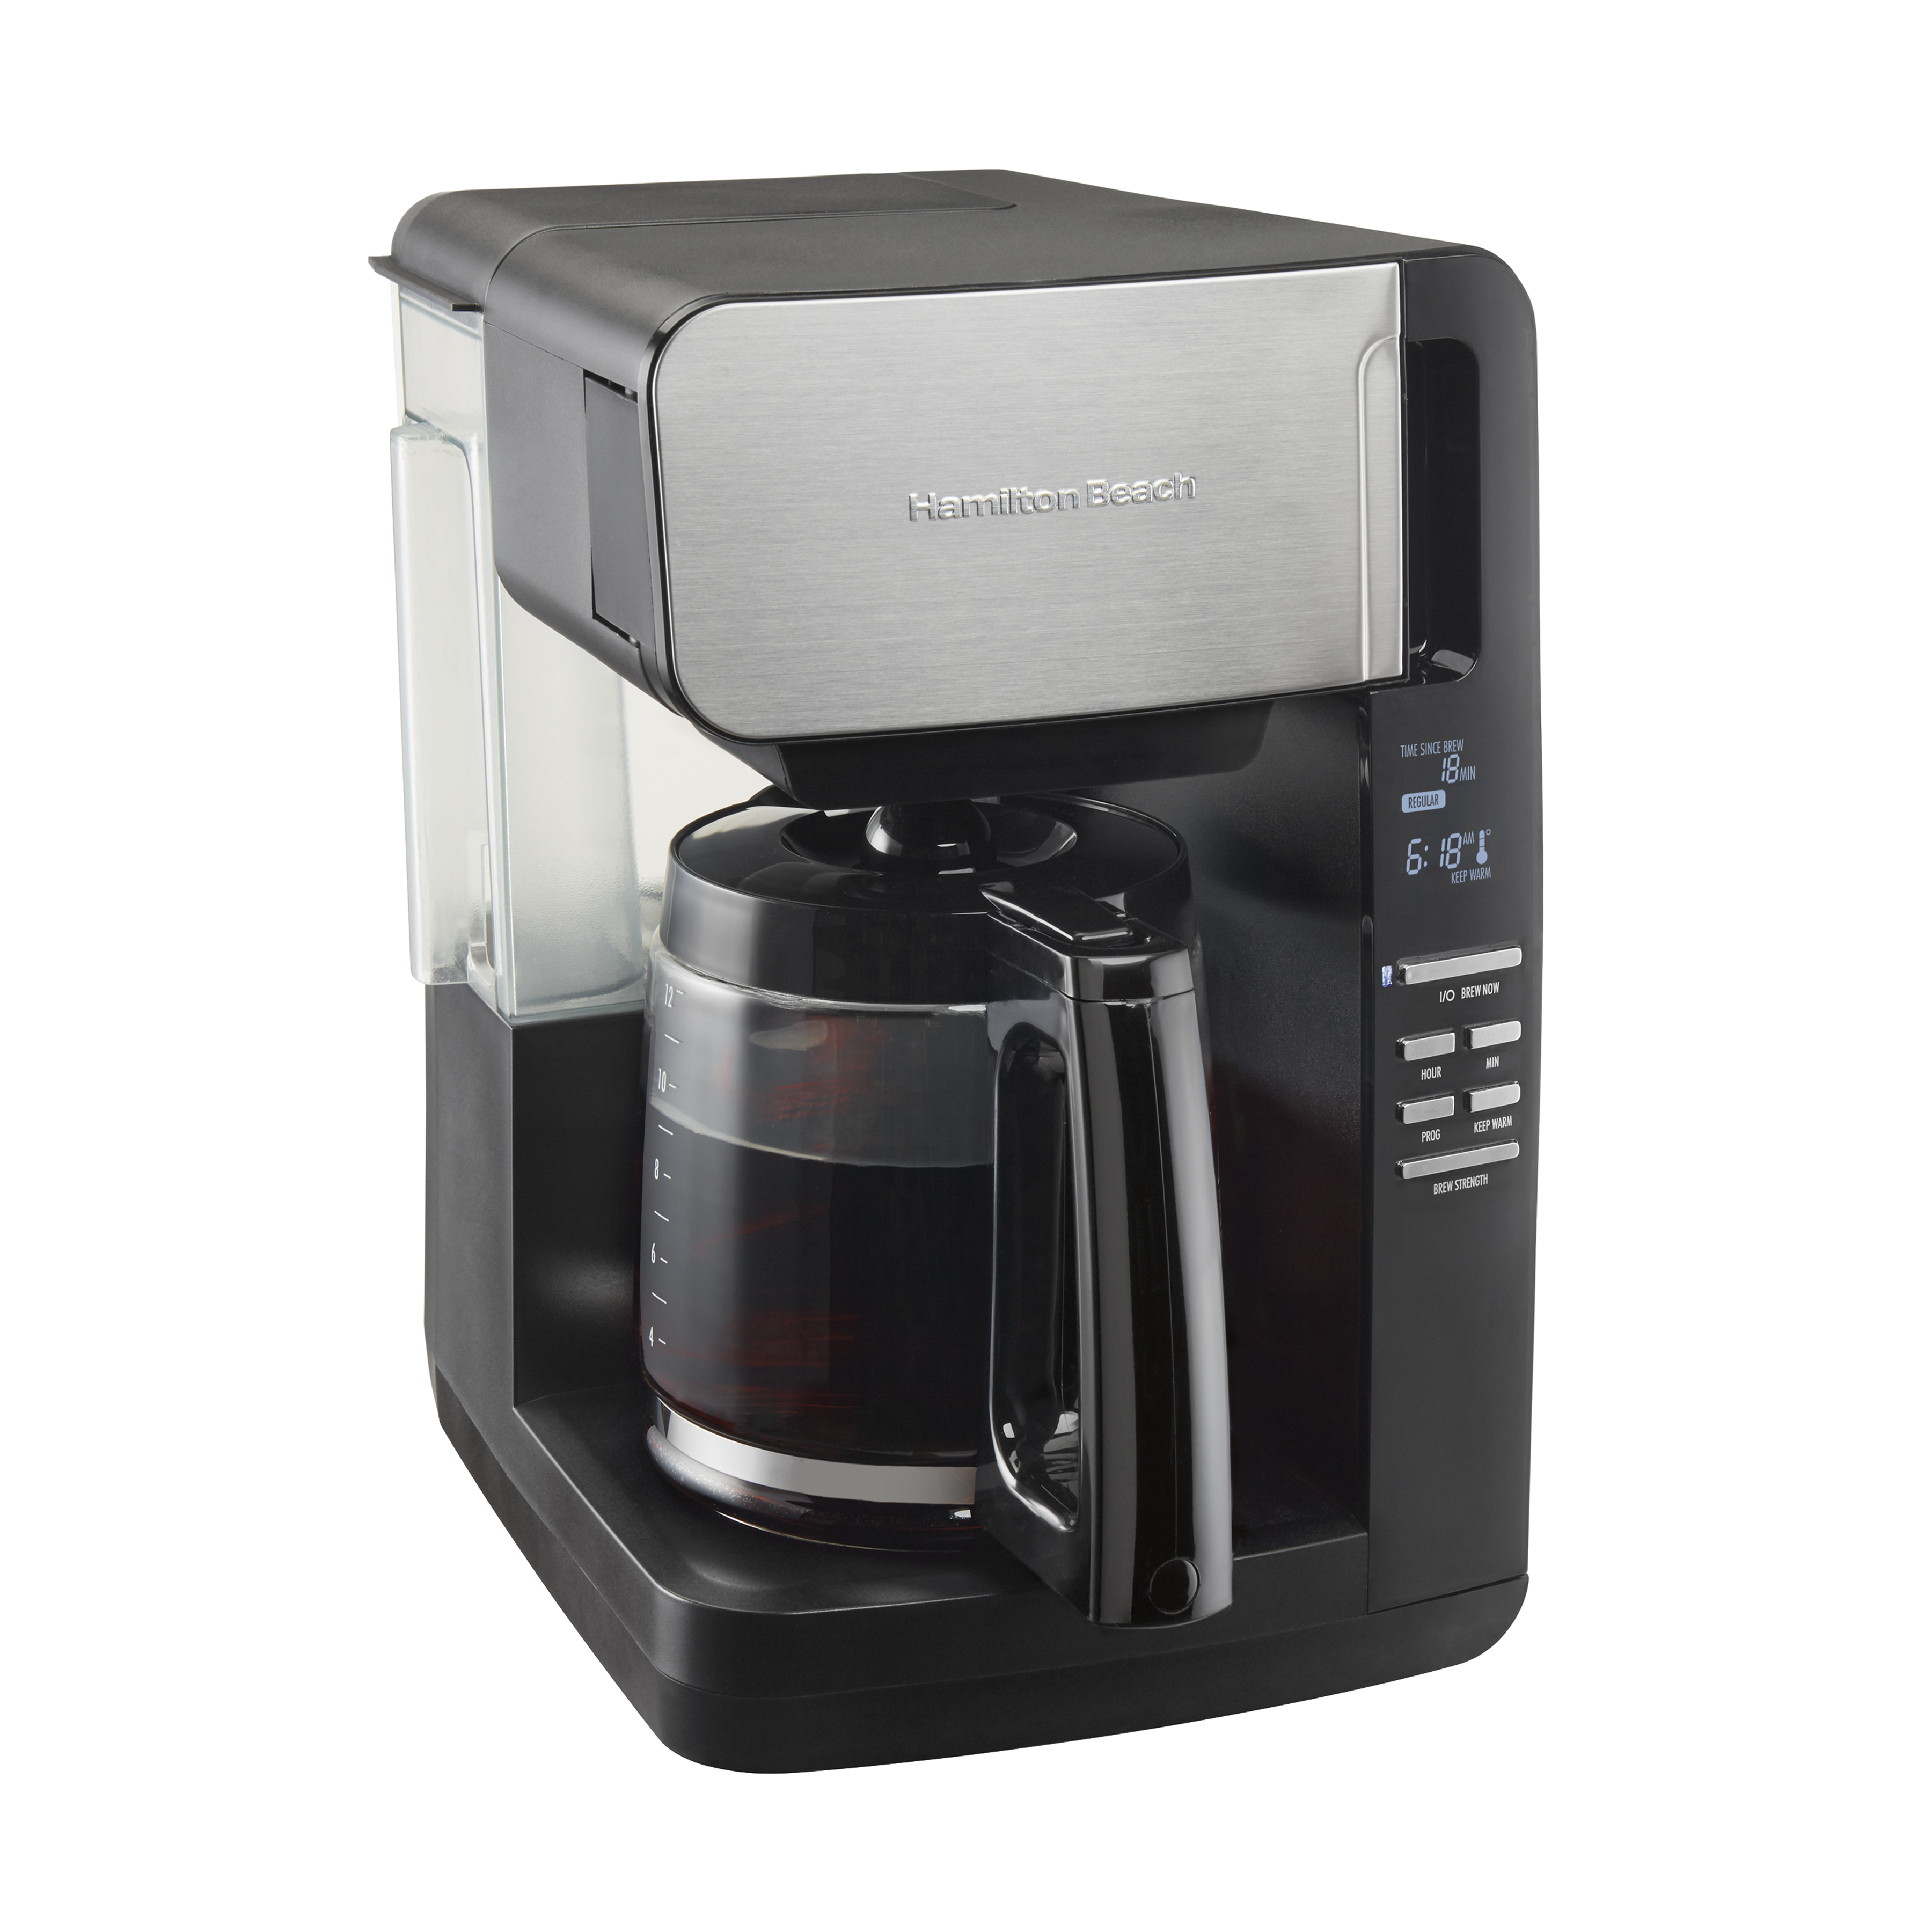 Hamilton Beach 12 Cup Coffee Maker, Front Fill, Removable Reservoir, 46203 - image 1 of 8